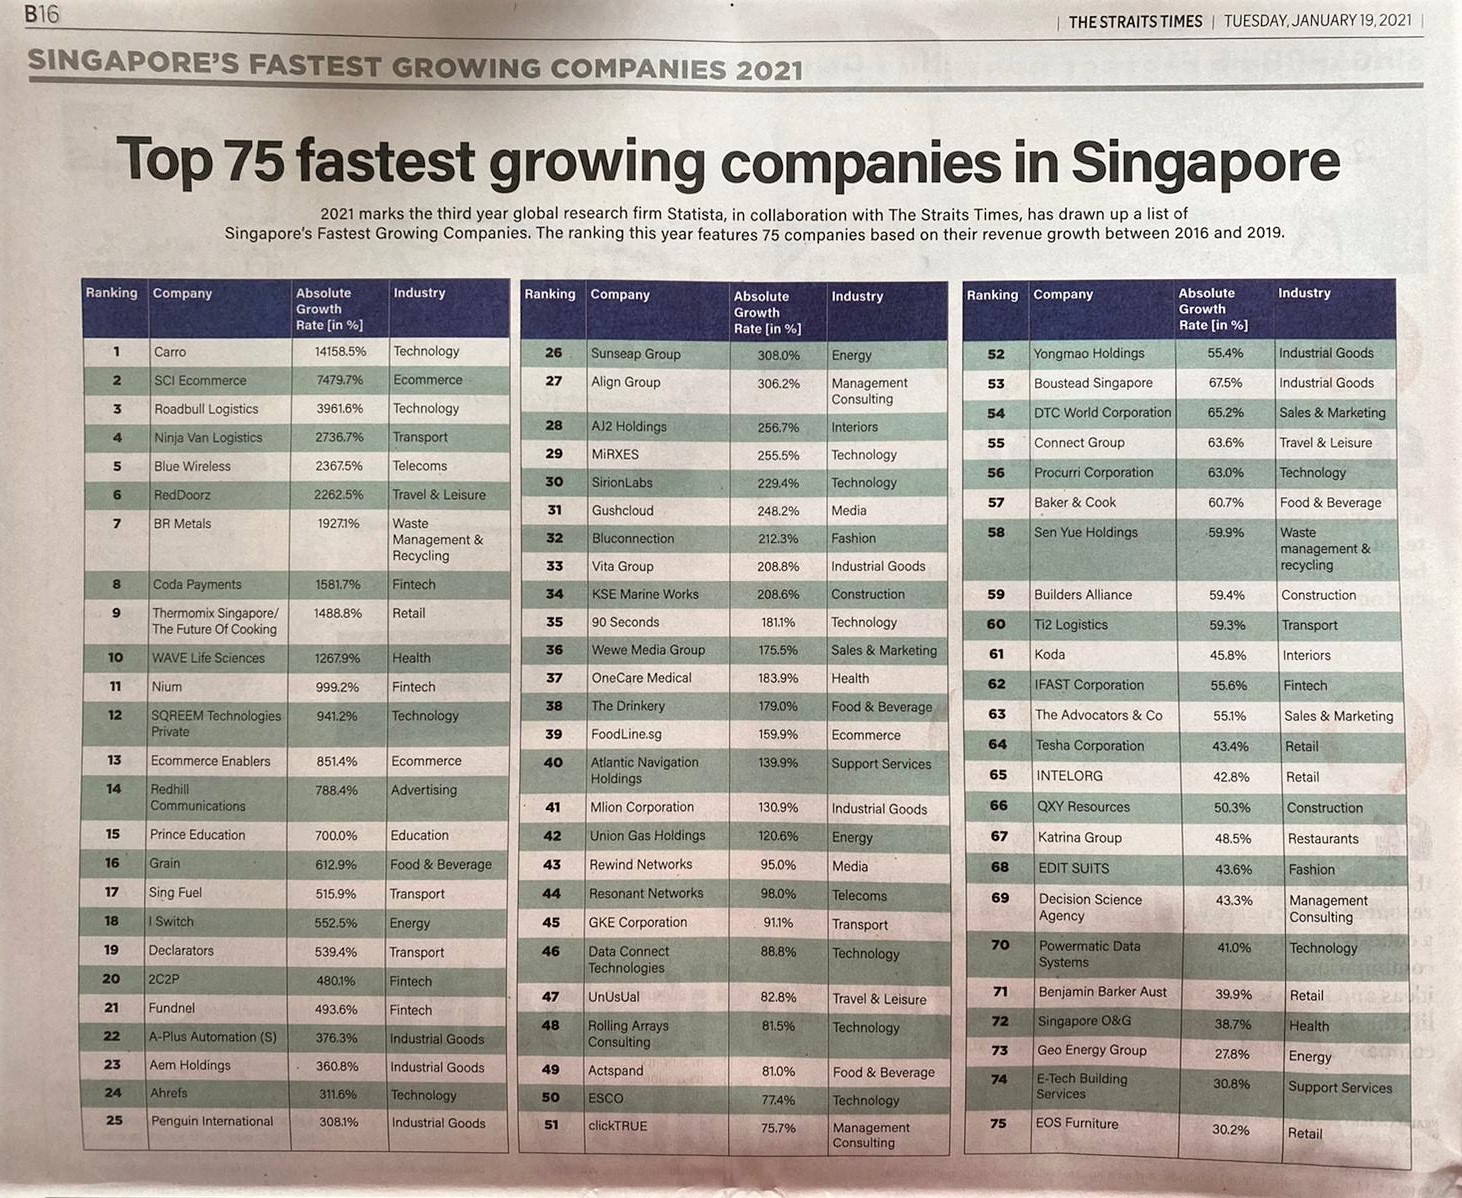 We Made It! SINGAPORE'S FASTEST GROWING COMPANIES 2021 APAC